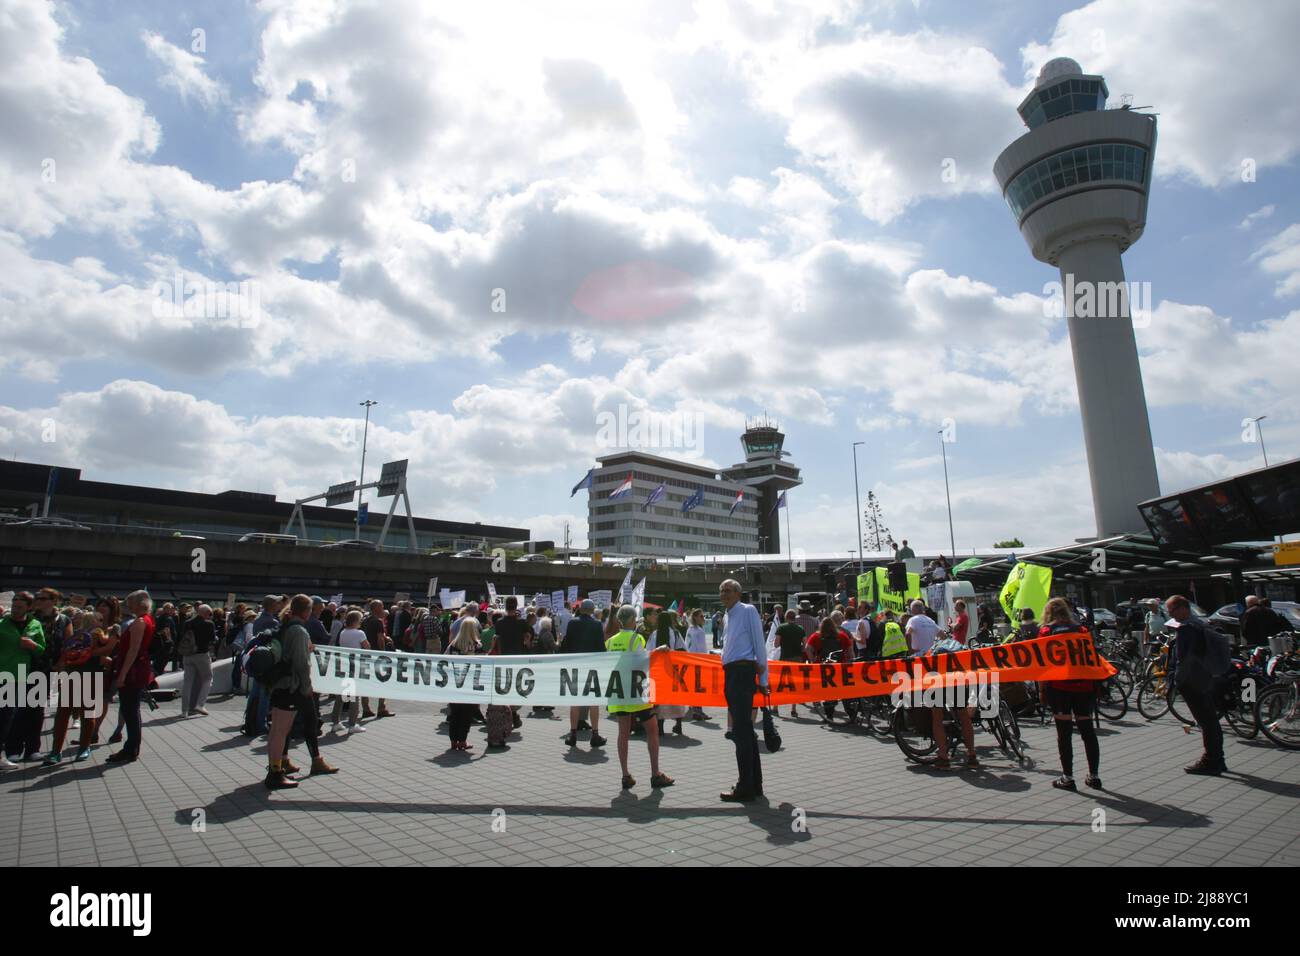 Amsterdam, Netherlands. 14th May, 2022. Environmental activists Extinction Rebellions protest at the Schiphol Airport on May 14, 2022 in Amsterdam, Netherlands. Environmental protectors of Greenpeace and Extinction Rebellion make a large demonstration at the Schiphol against expansion of aviation and purpose to draw attention to the views in a positive way, such as limiting the use of fossil fuels and the need to shrink aviation. (Photo by Paulo Amorim/Sipa USA) Credit: Sipa USA/Alamy Live News Stock Photo